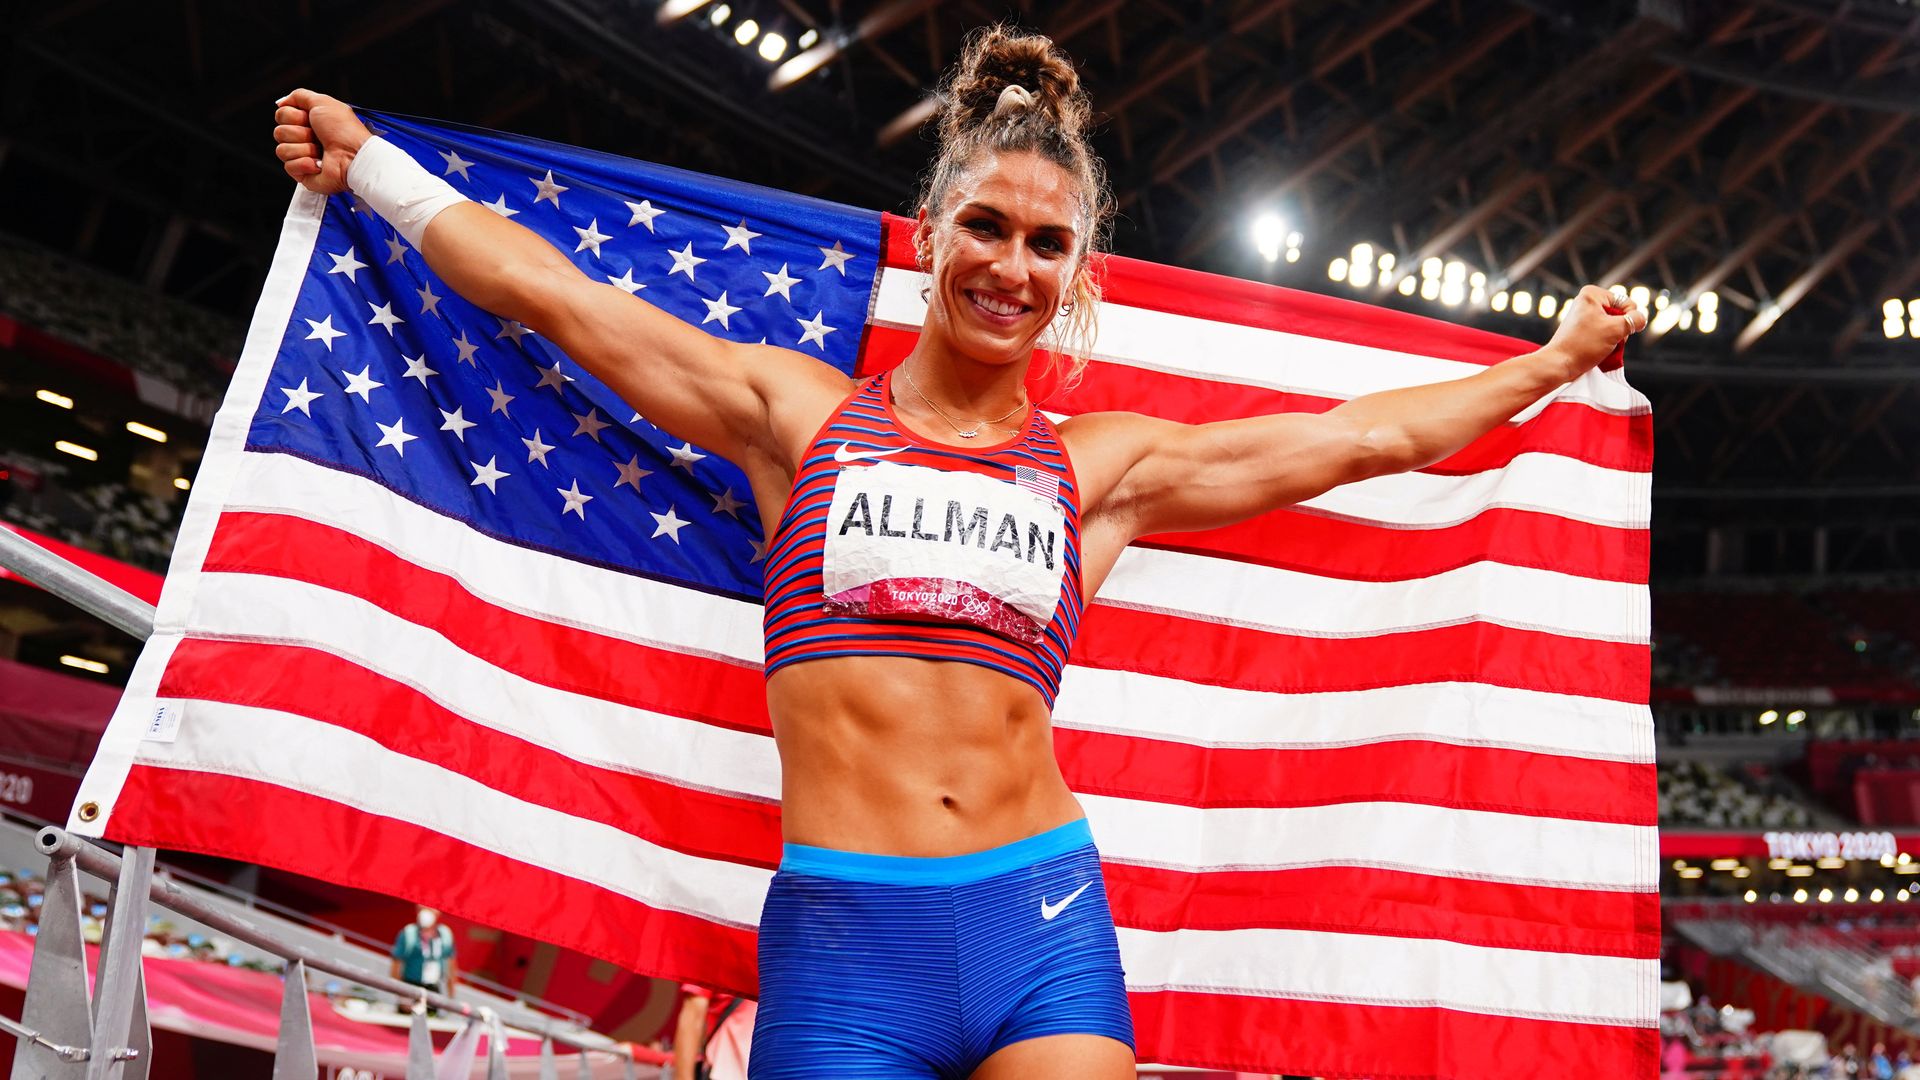 Valarie Allman of Team USA holding up an American flag behind her